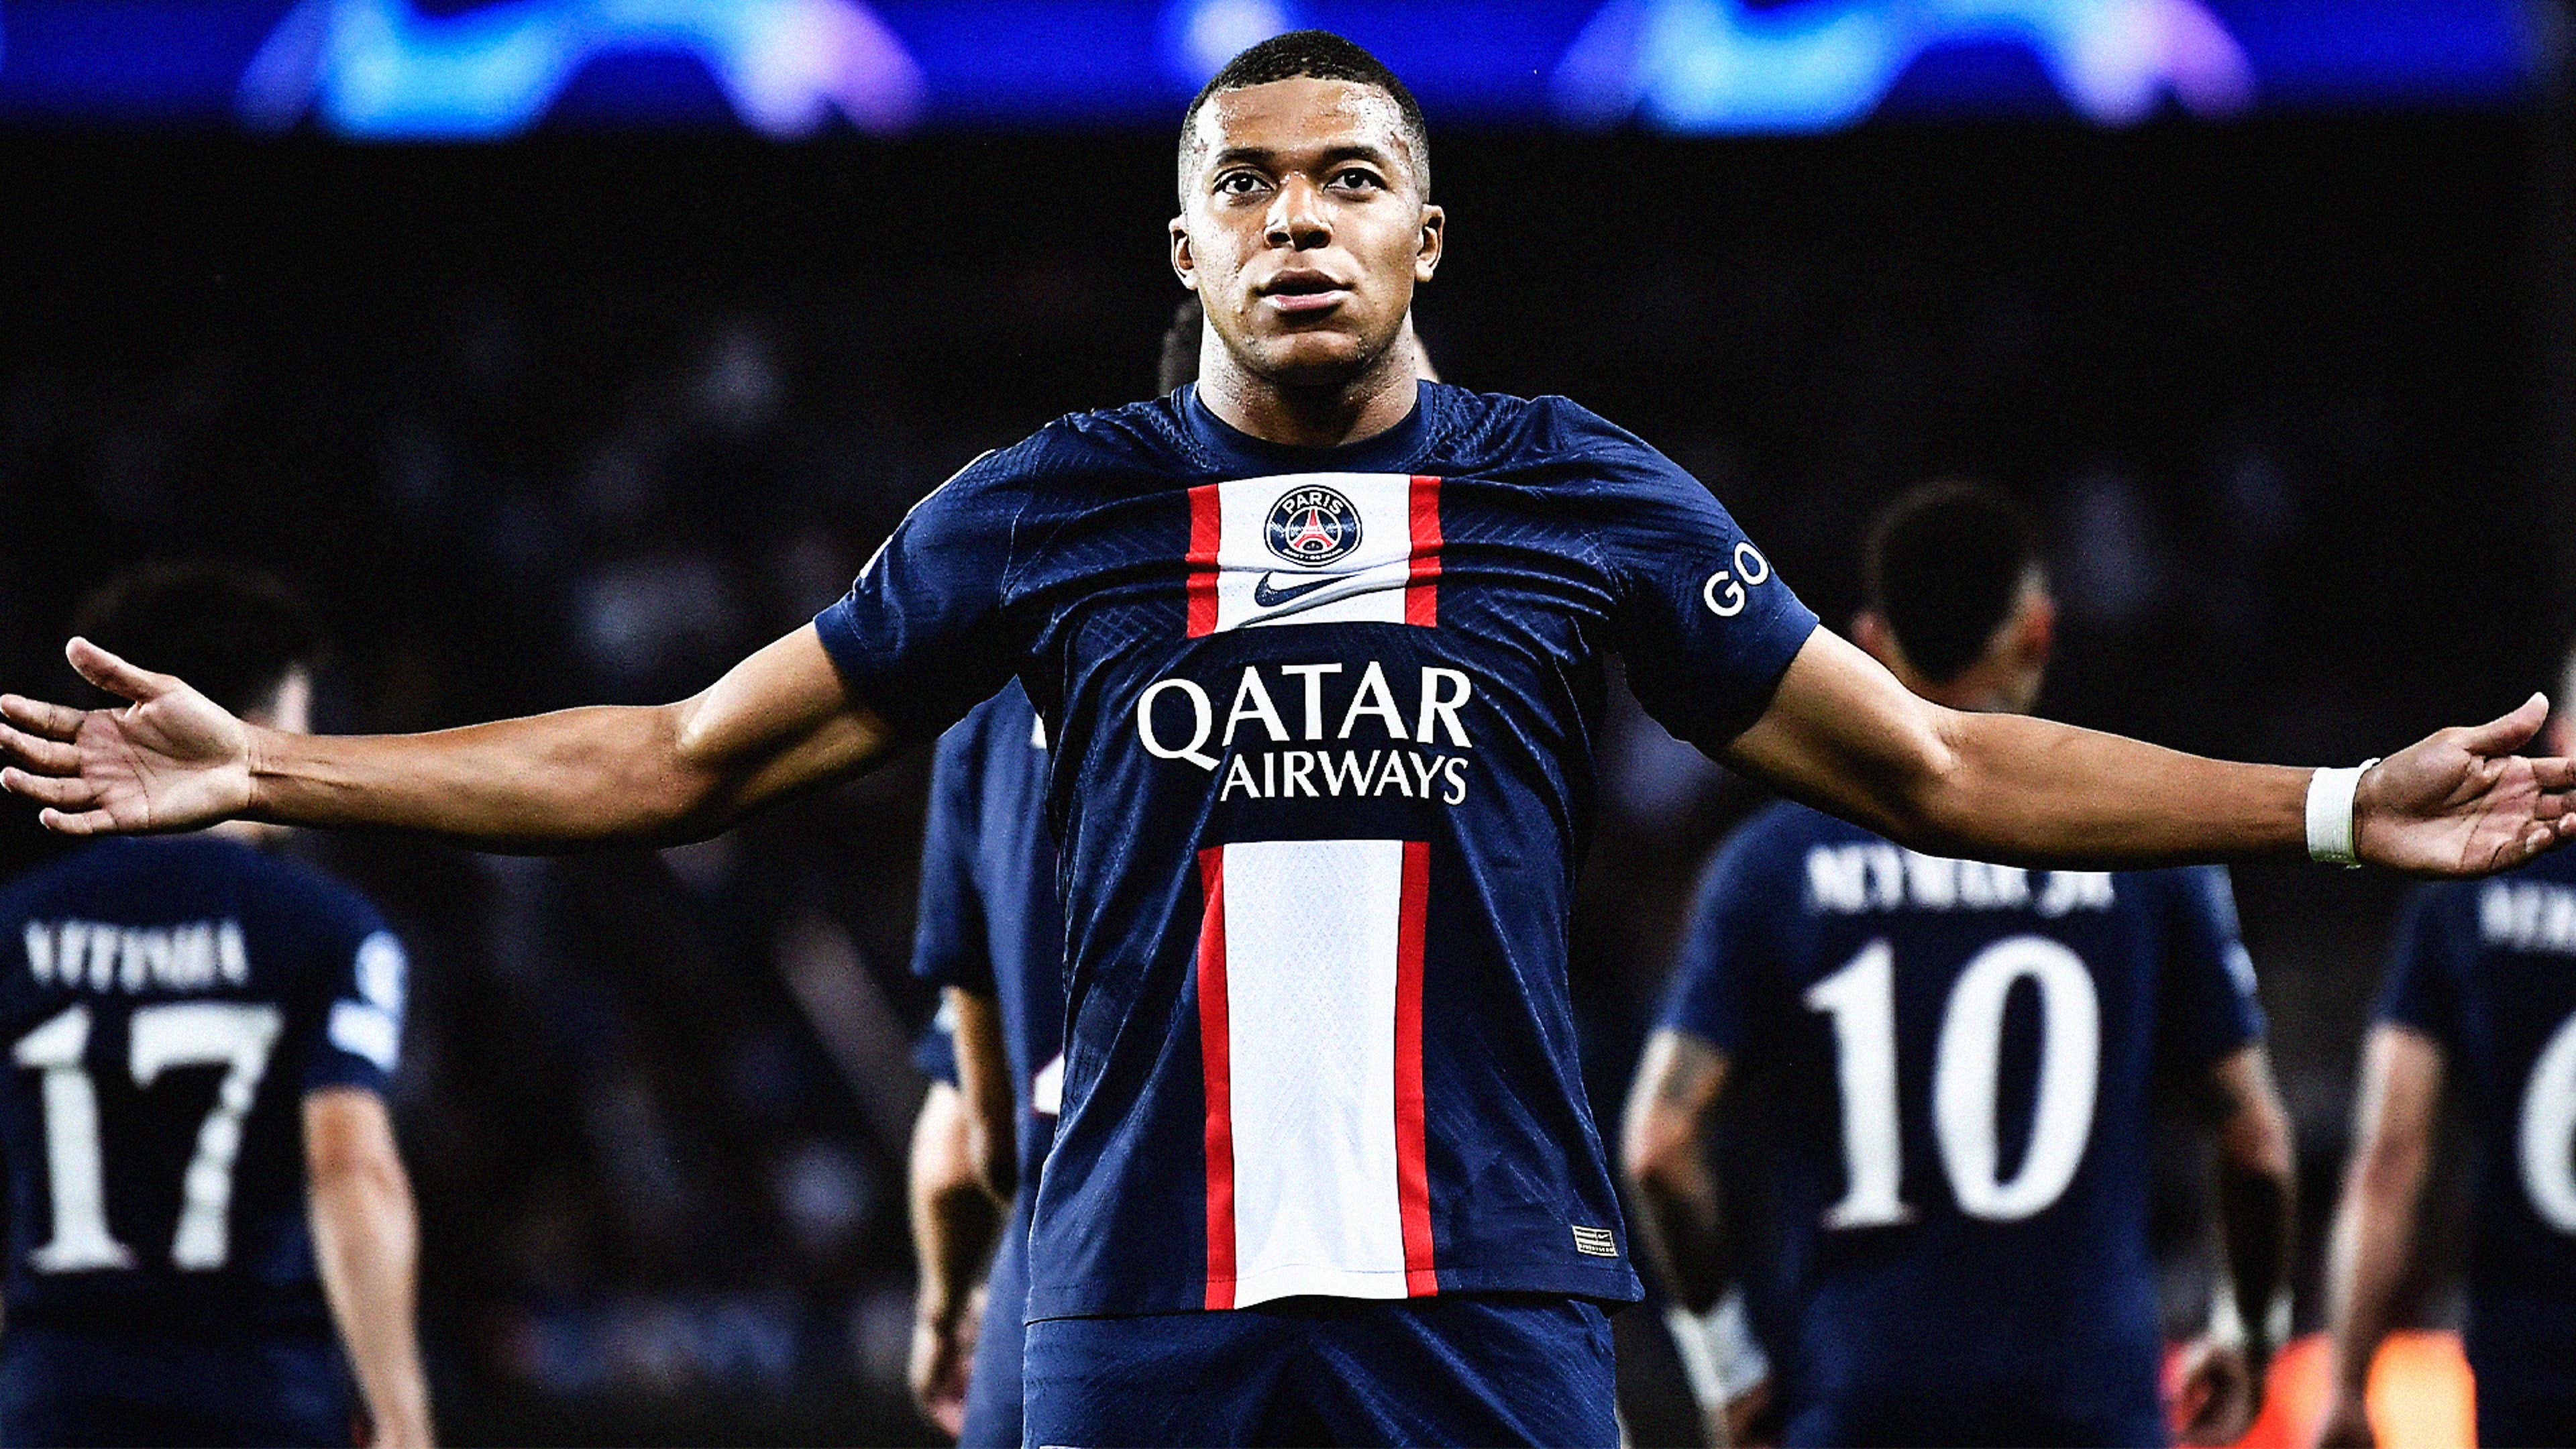 PSG-Nice preview: Mbappé set to play